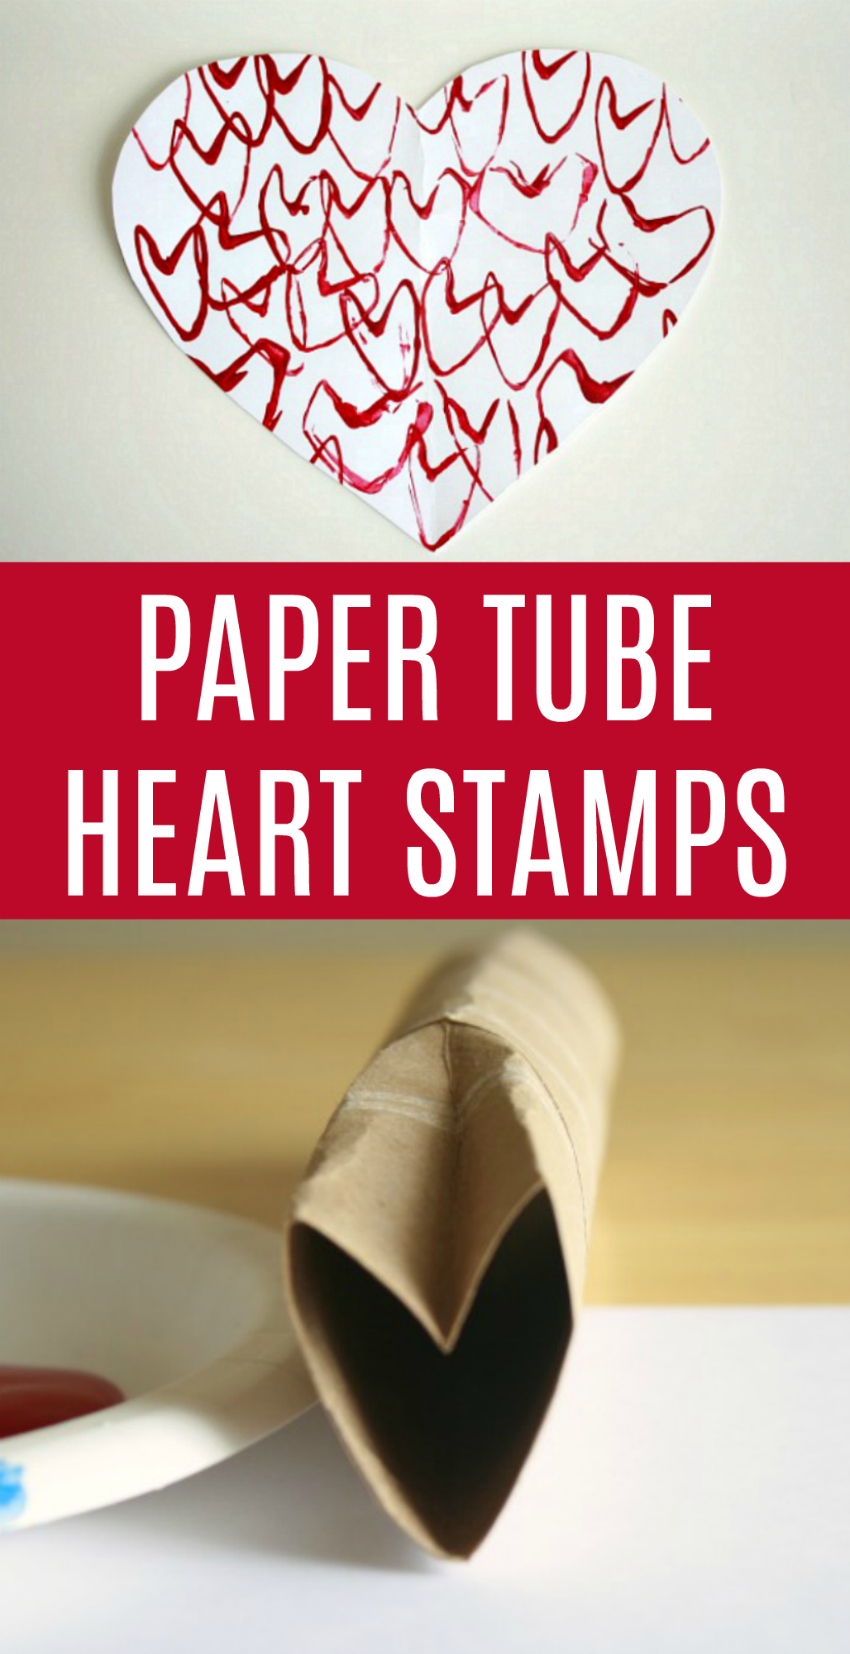 Make Paper Tube Heart Stamps